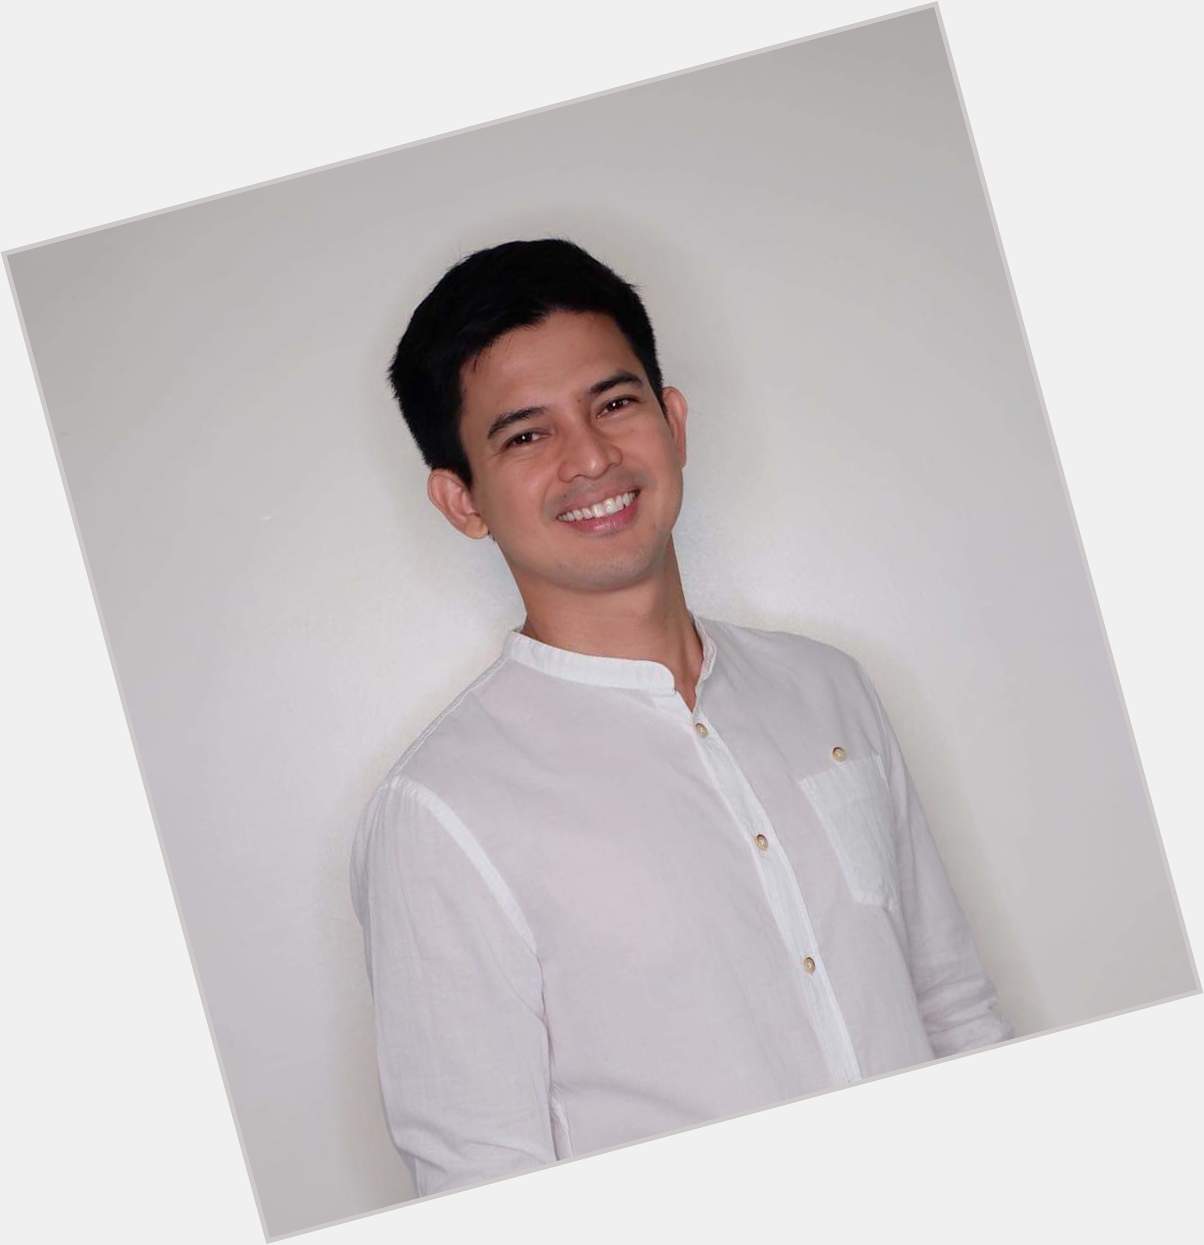 Happy birthday, Jason Abalos! May all your birthday wishes come true.  